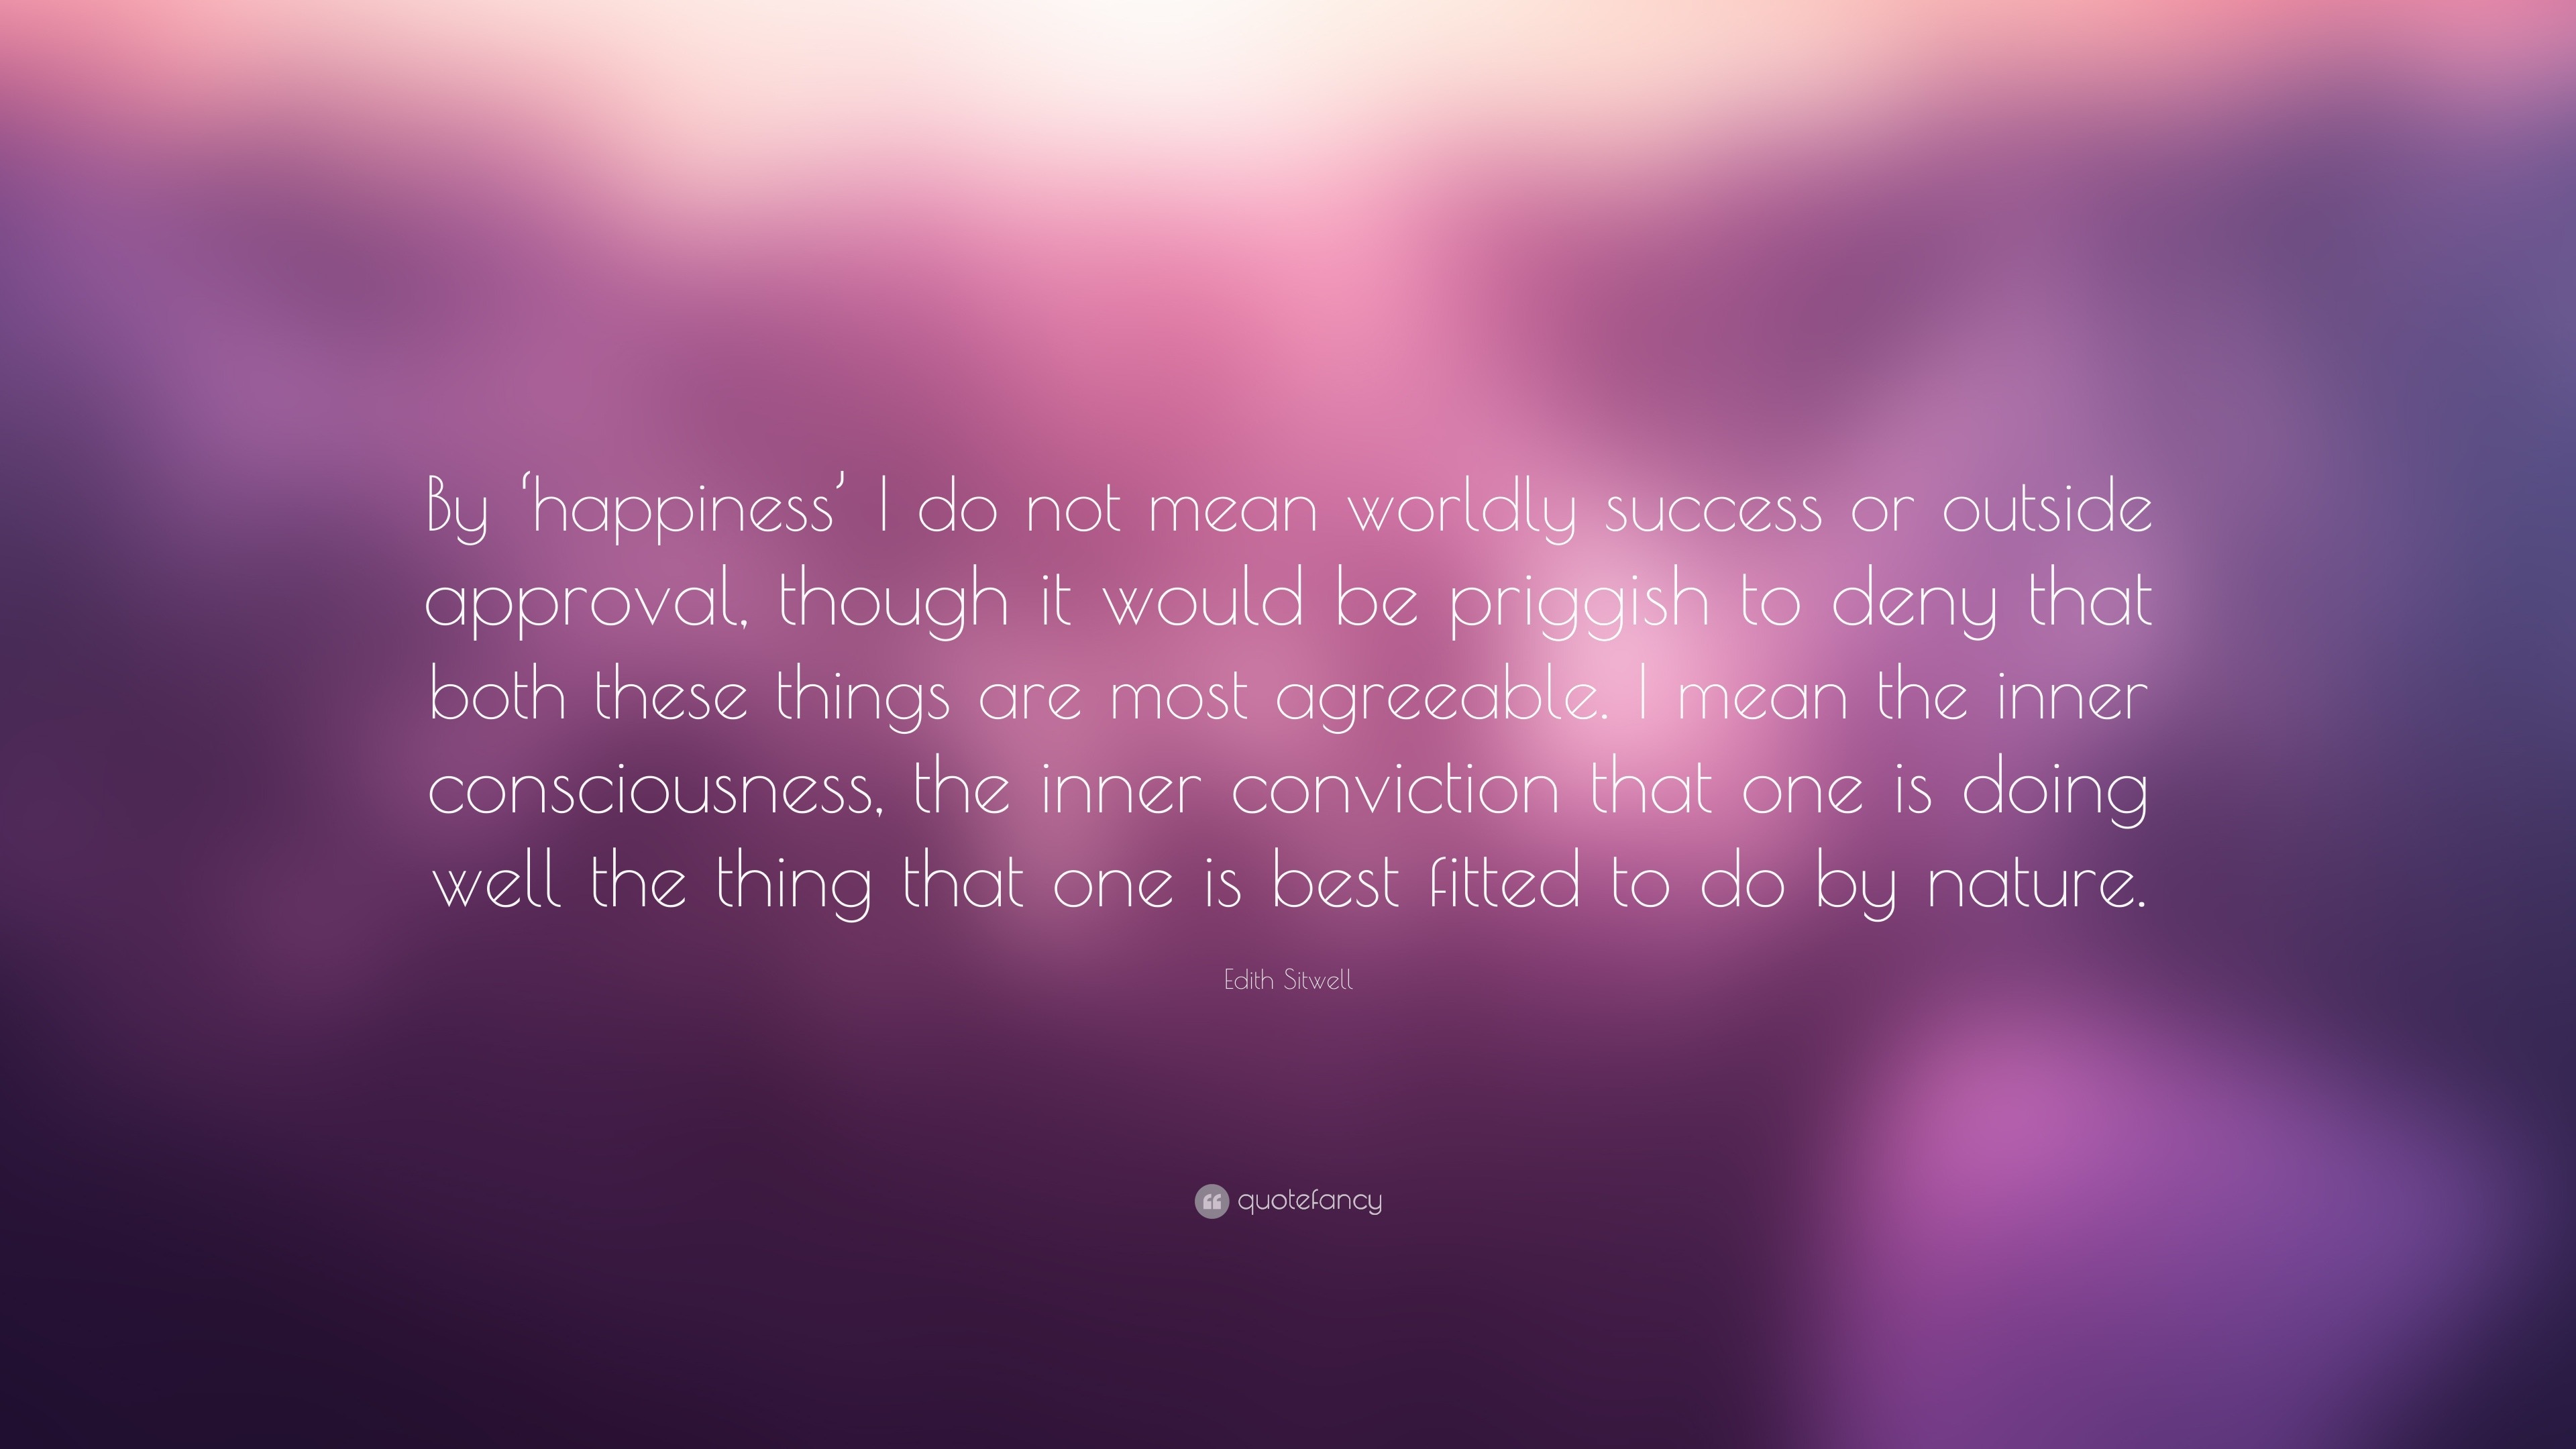 Edith Sitwell Quote: “By ‘happiness’ I do not mean worldly success or ...